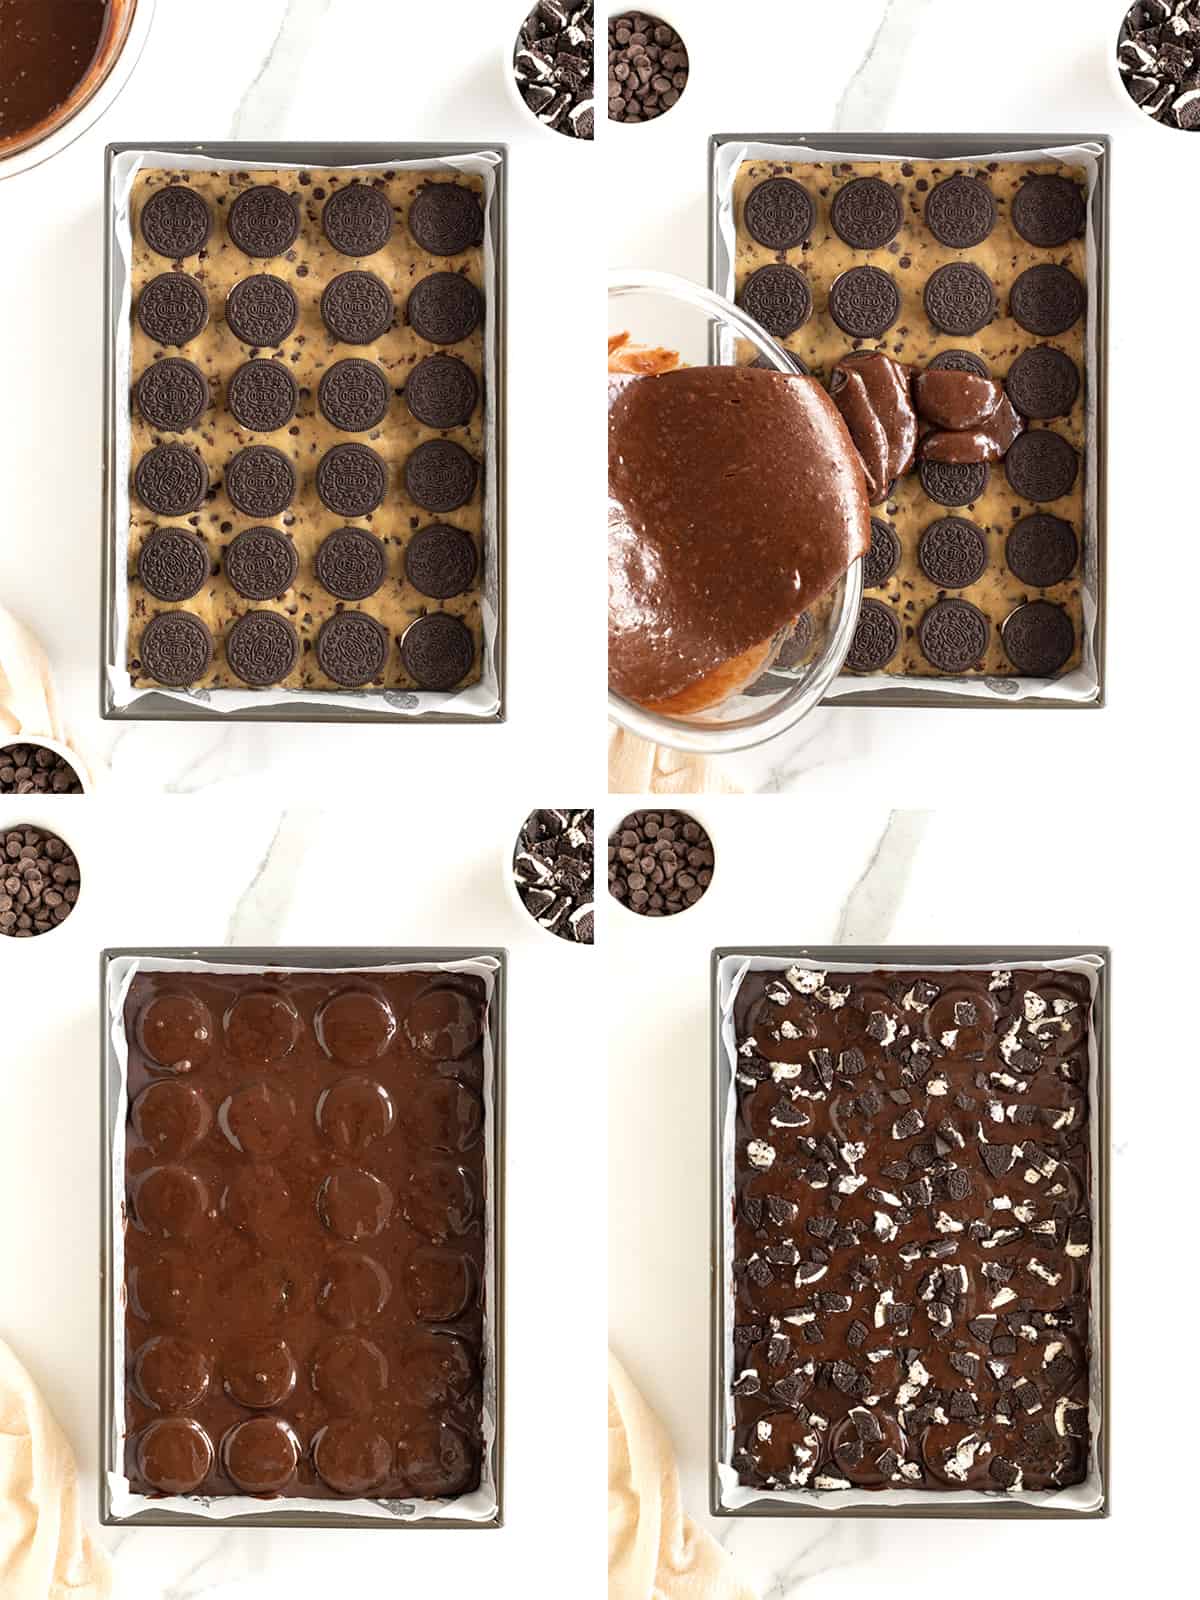 Steps for making triple threat brownies.